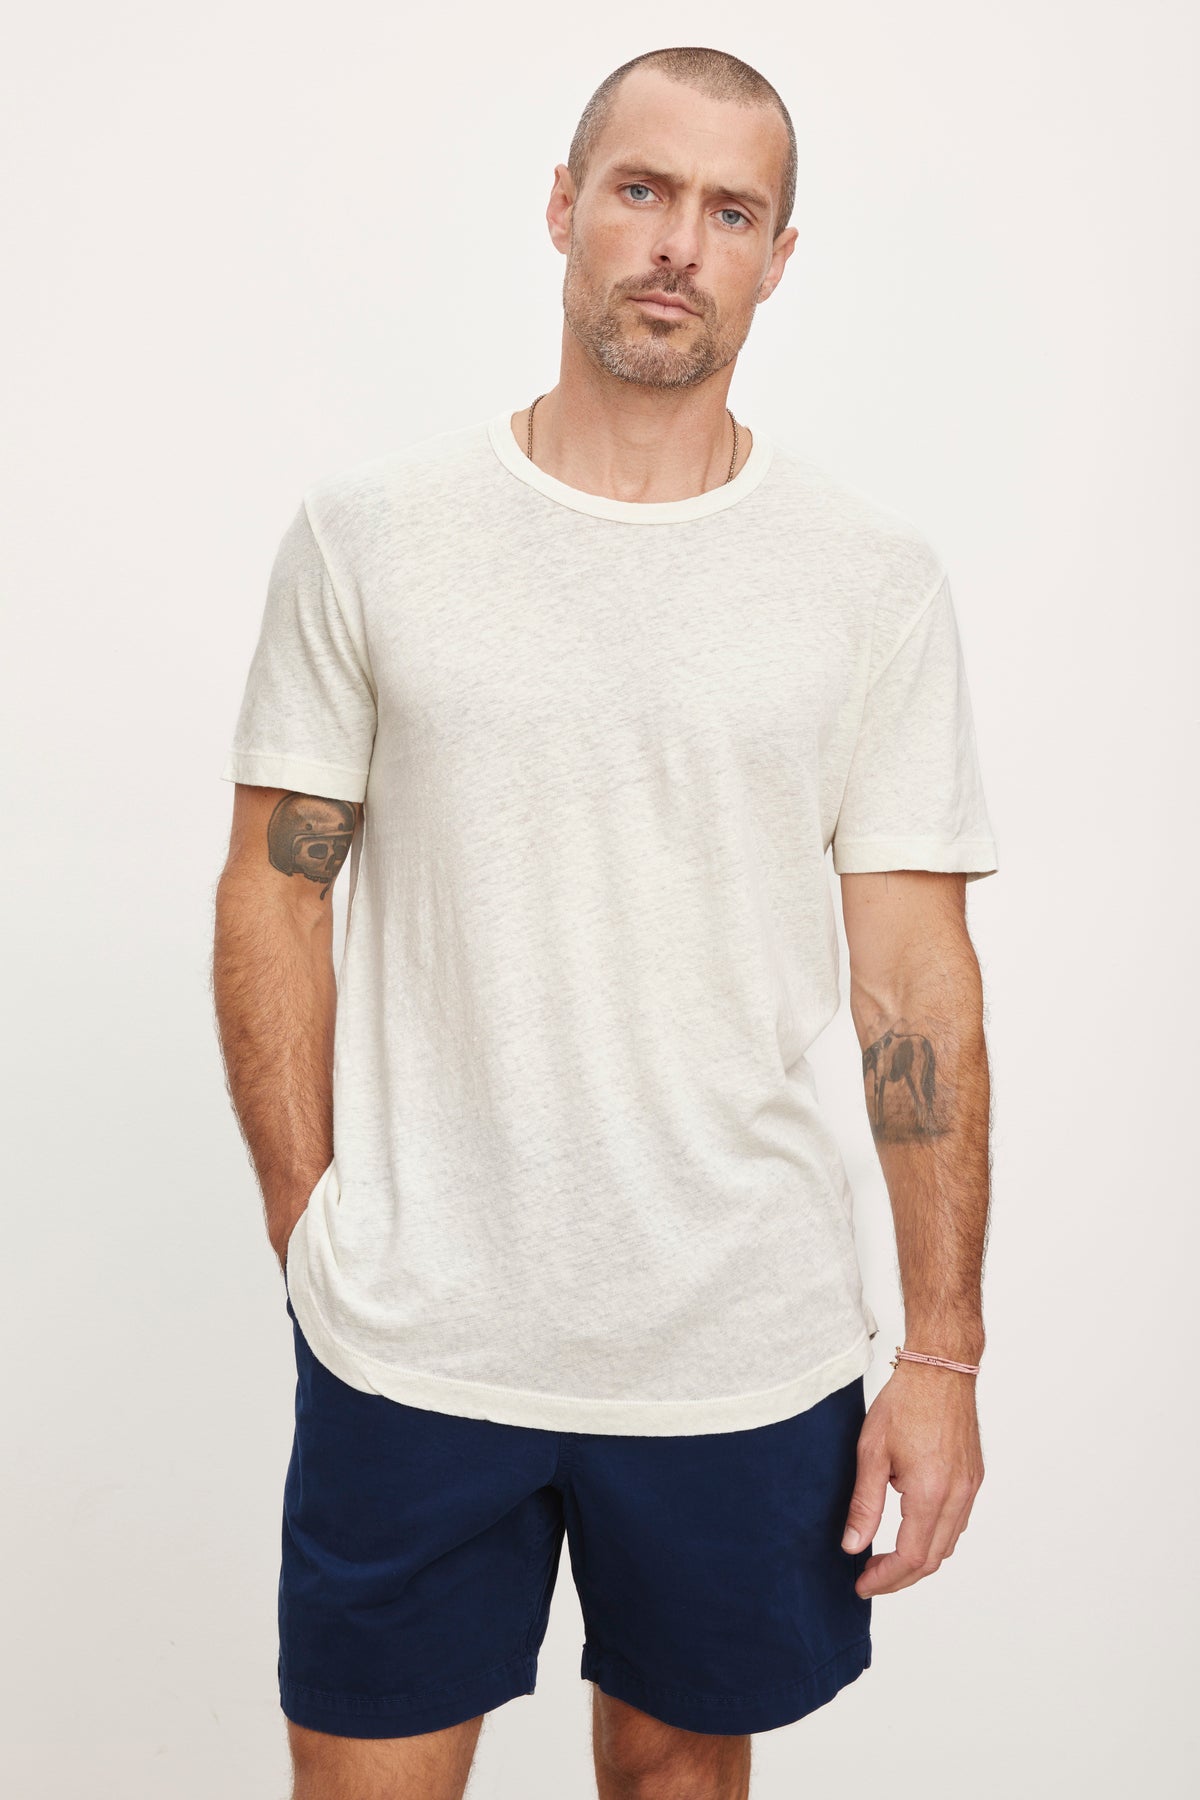 A man with a beard and tattoos stands against a white background, wearing a Velvet by Graham & Spencer Davey Tee in light gray and navy shorts.-36732521251009